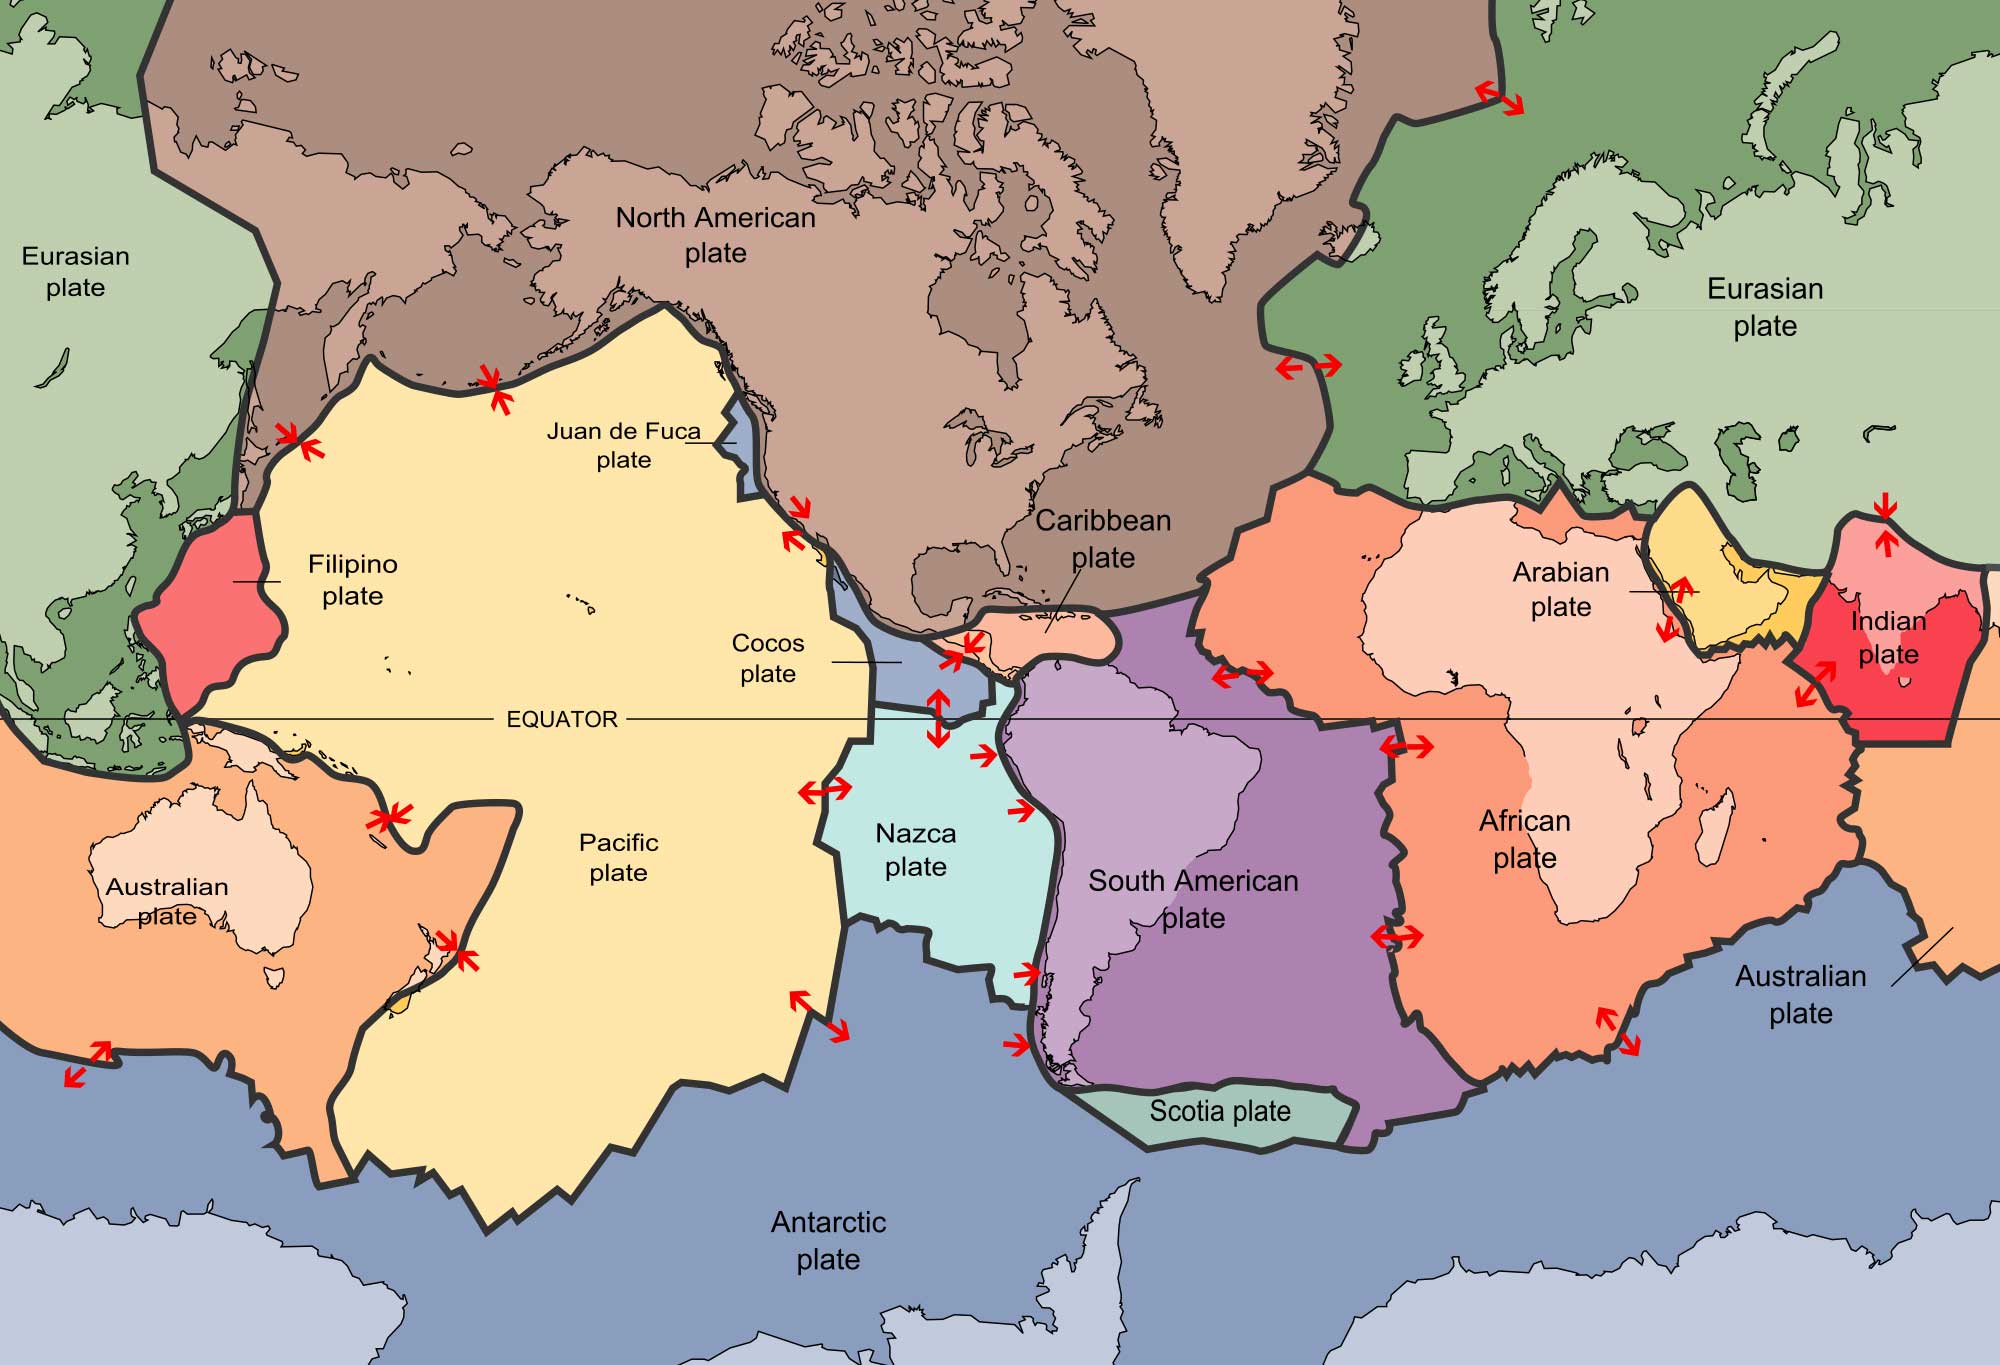 Image showing a world map and all of its different tectonic plates.